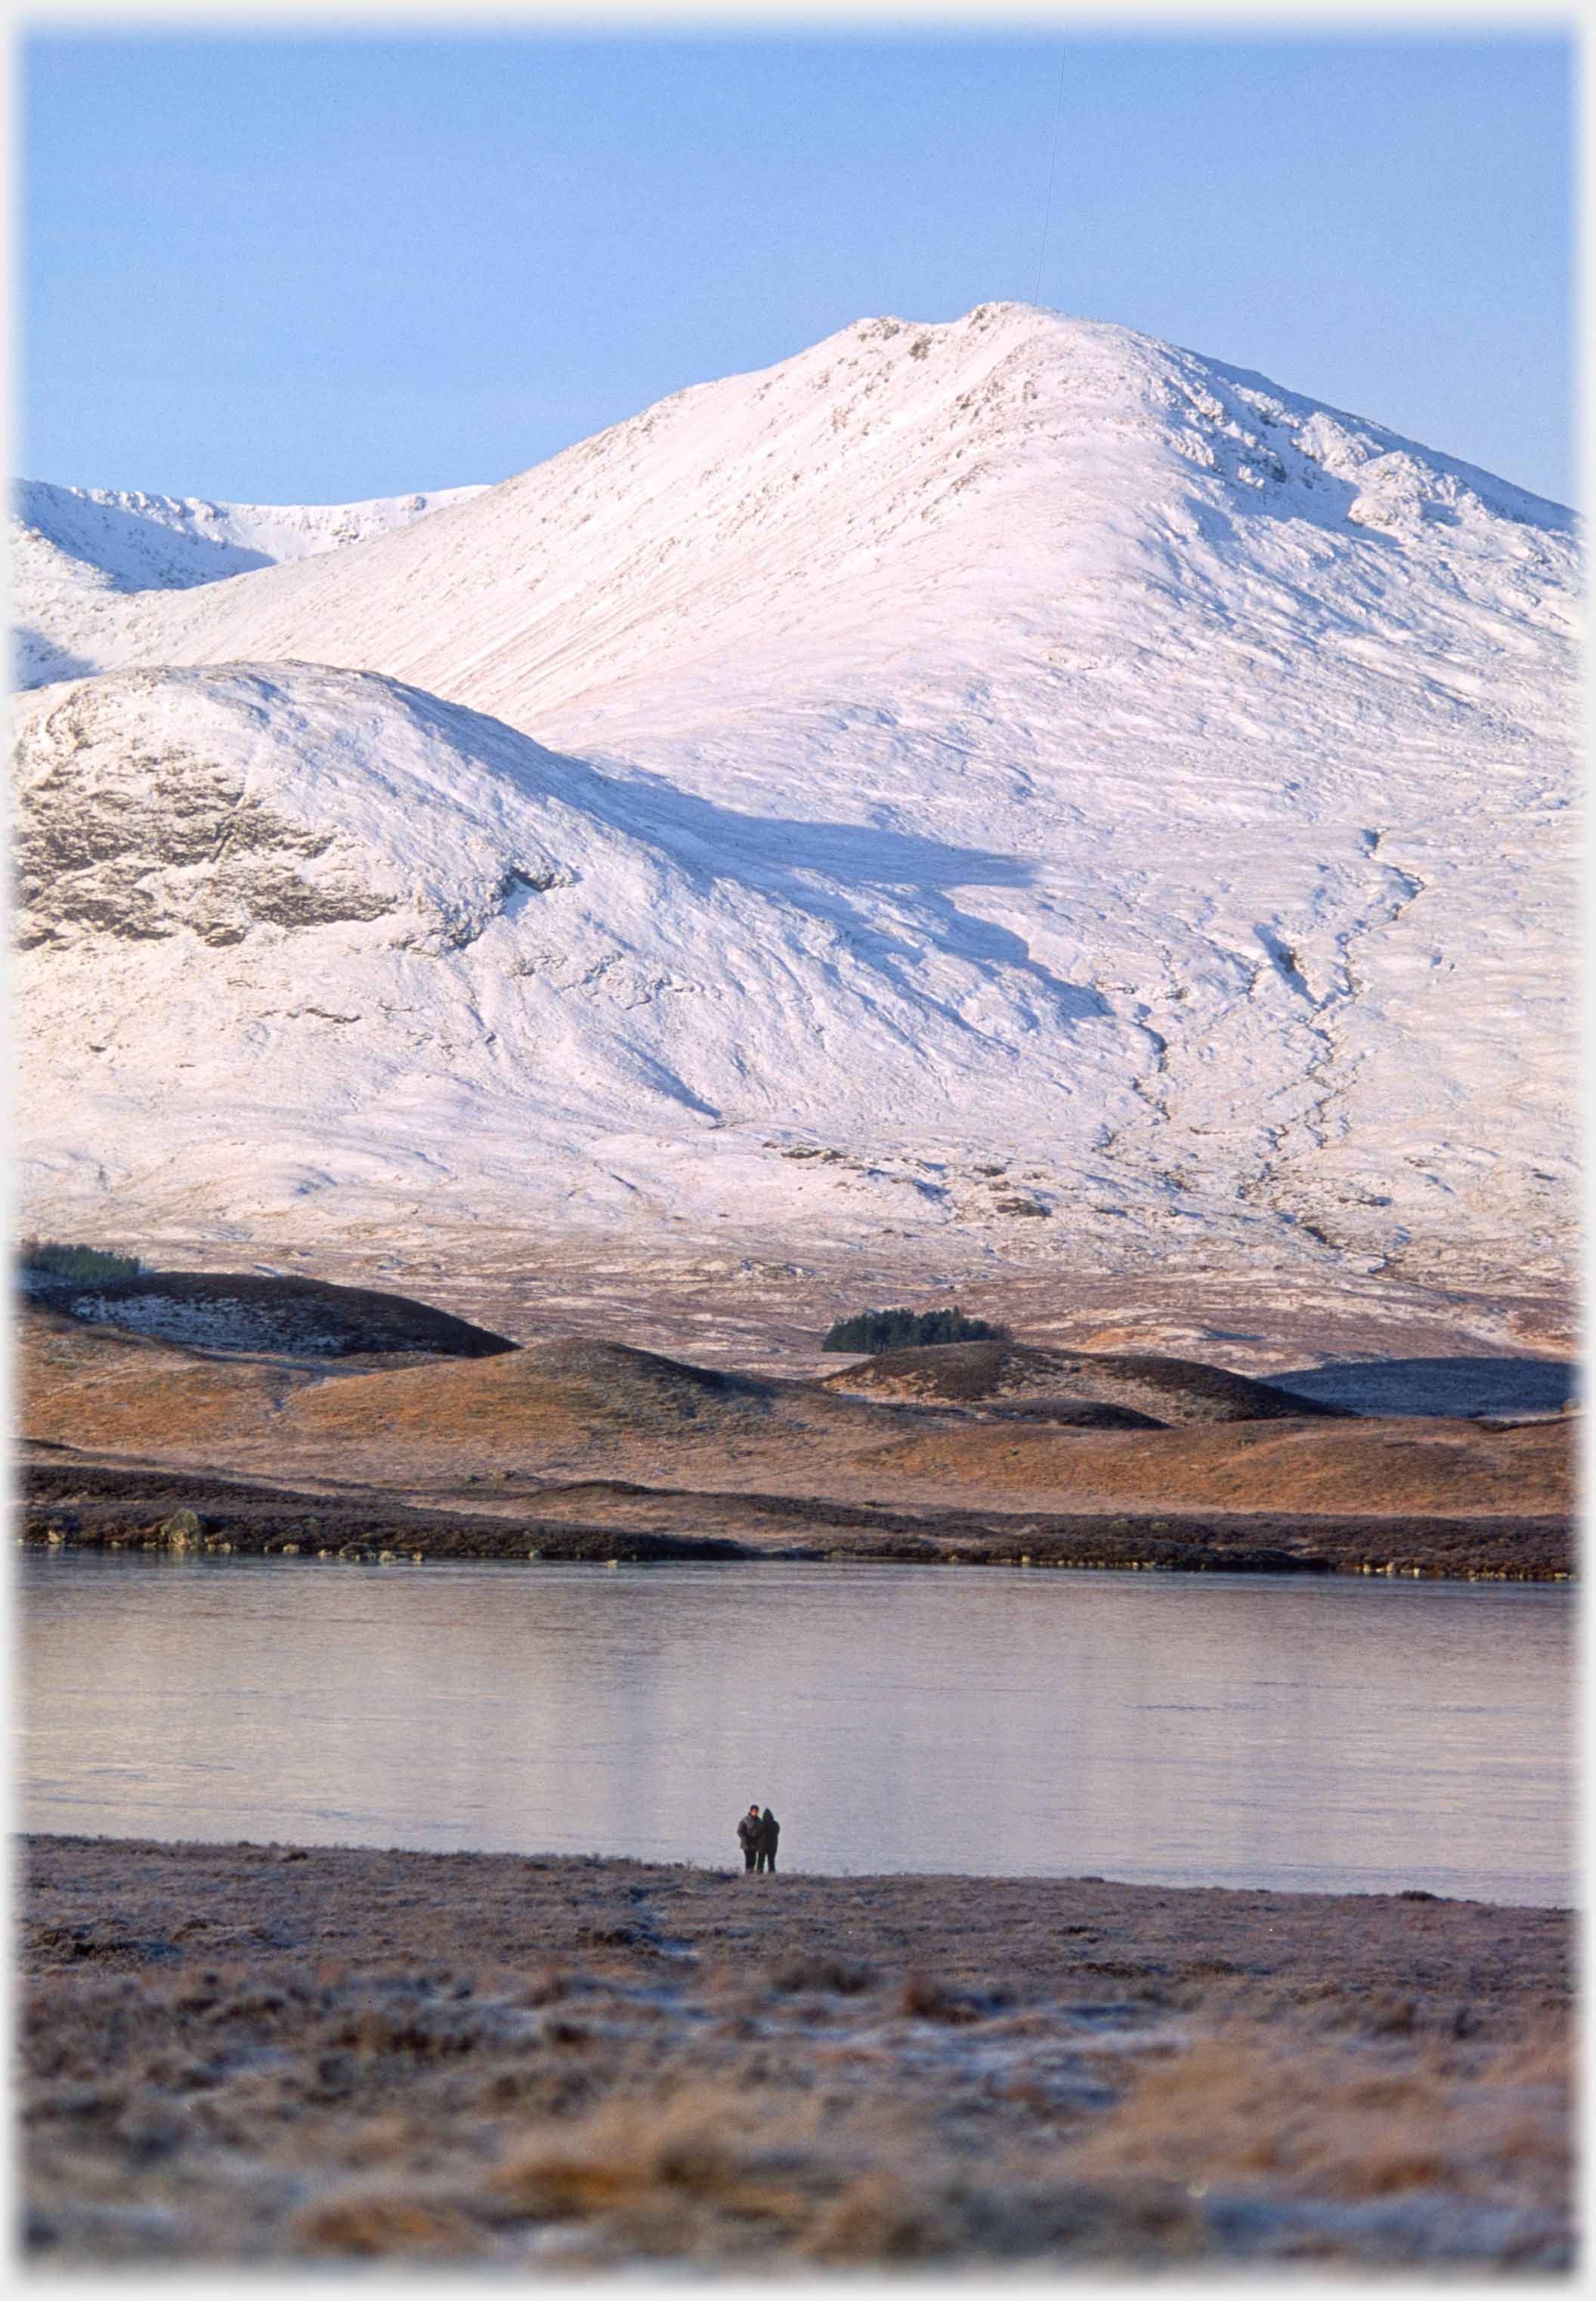 Some distance away two people stand beside a loch with snow covered hill on far side.